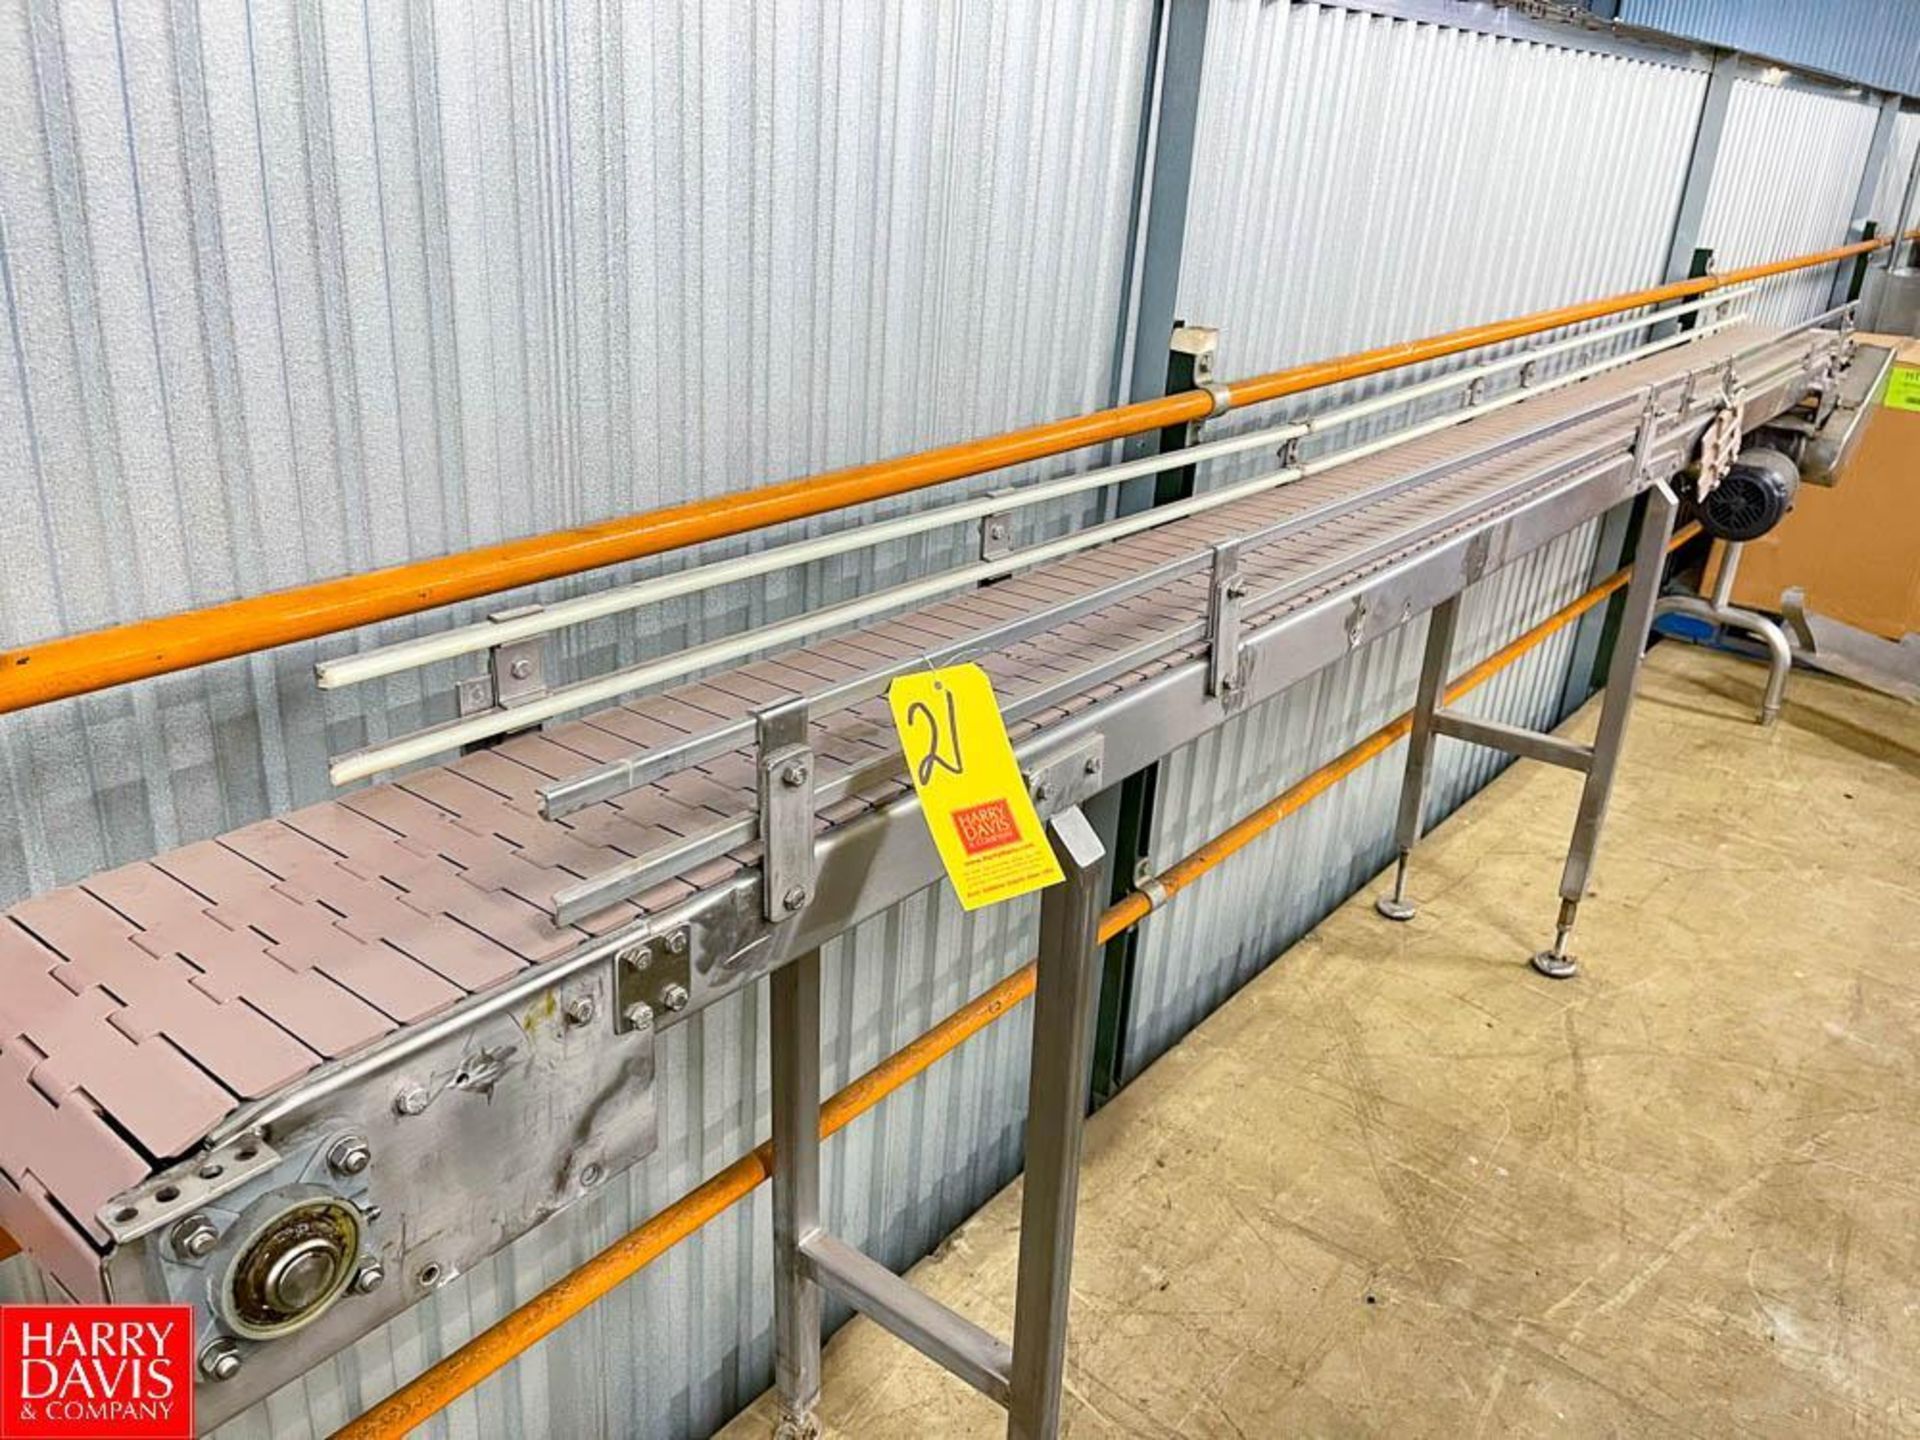 S/S Frame Product Conveyor with Drive and Plastic Tabletop Chain, Dimensions= 154" Length x 10" Widt